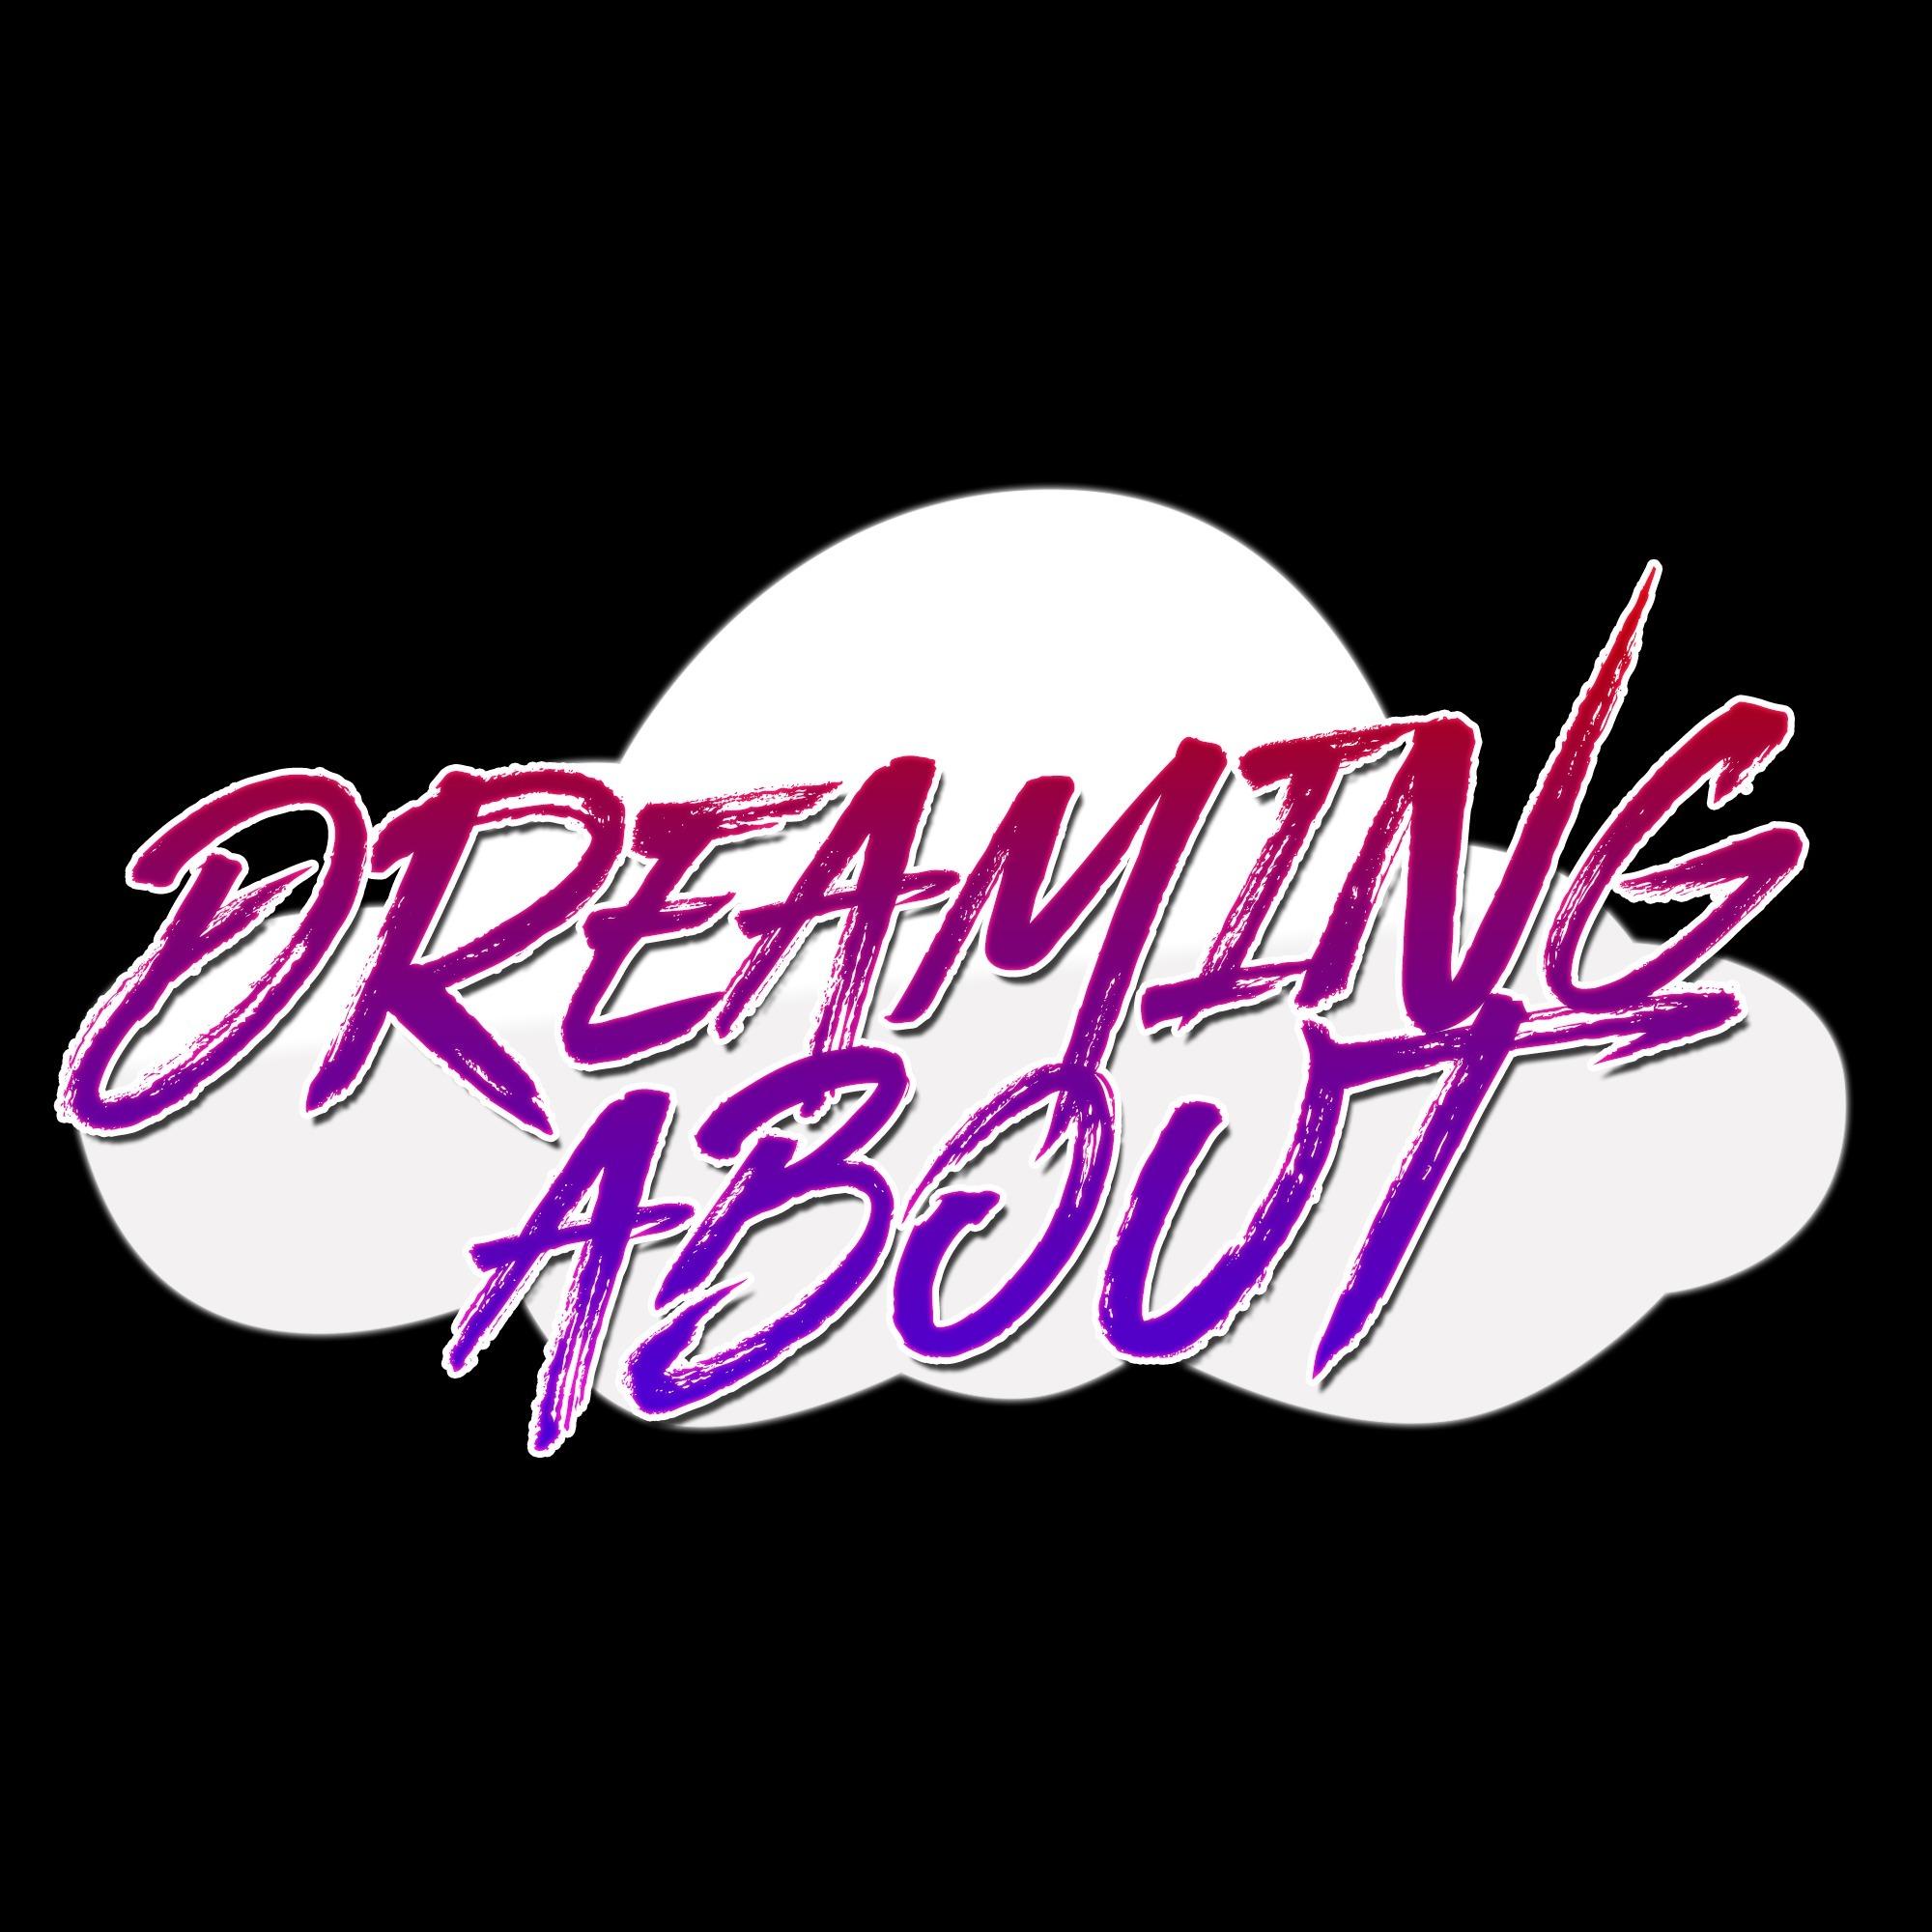 Dreaming About... Podcast